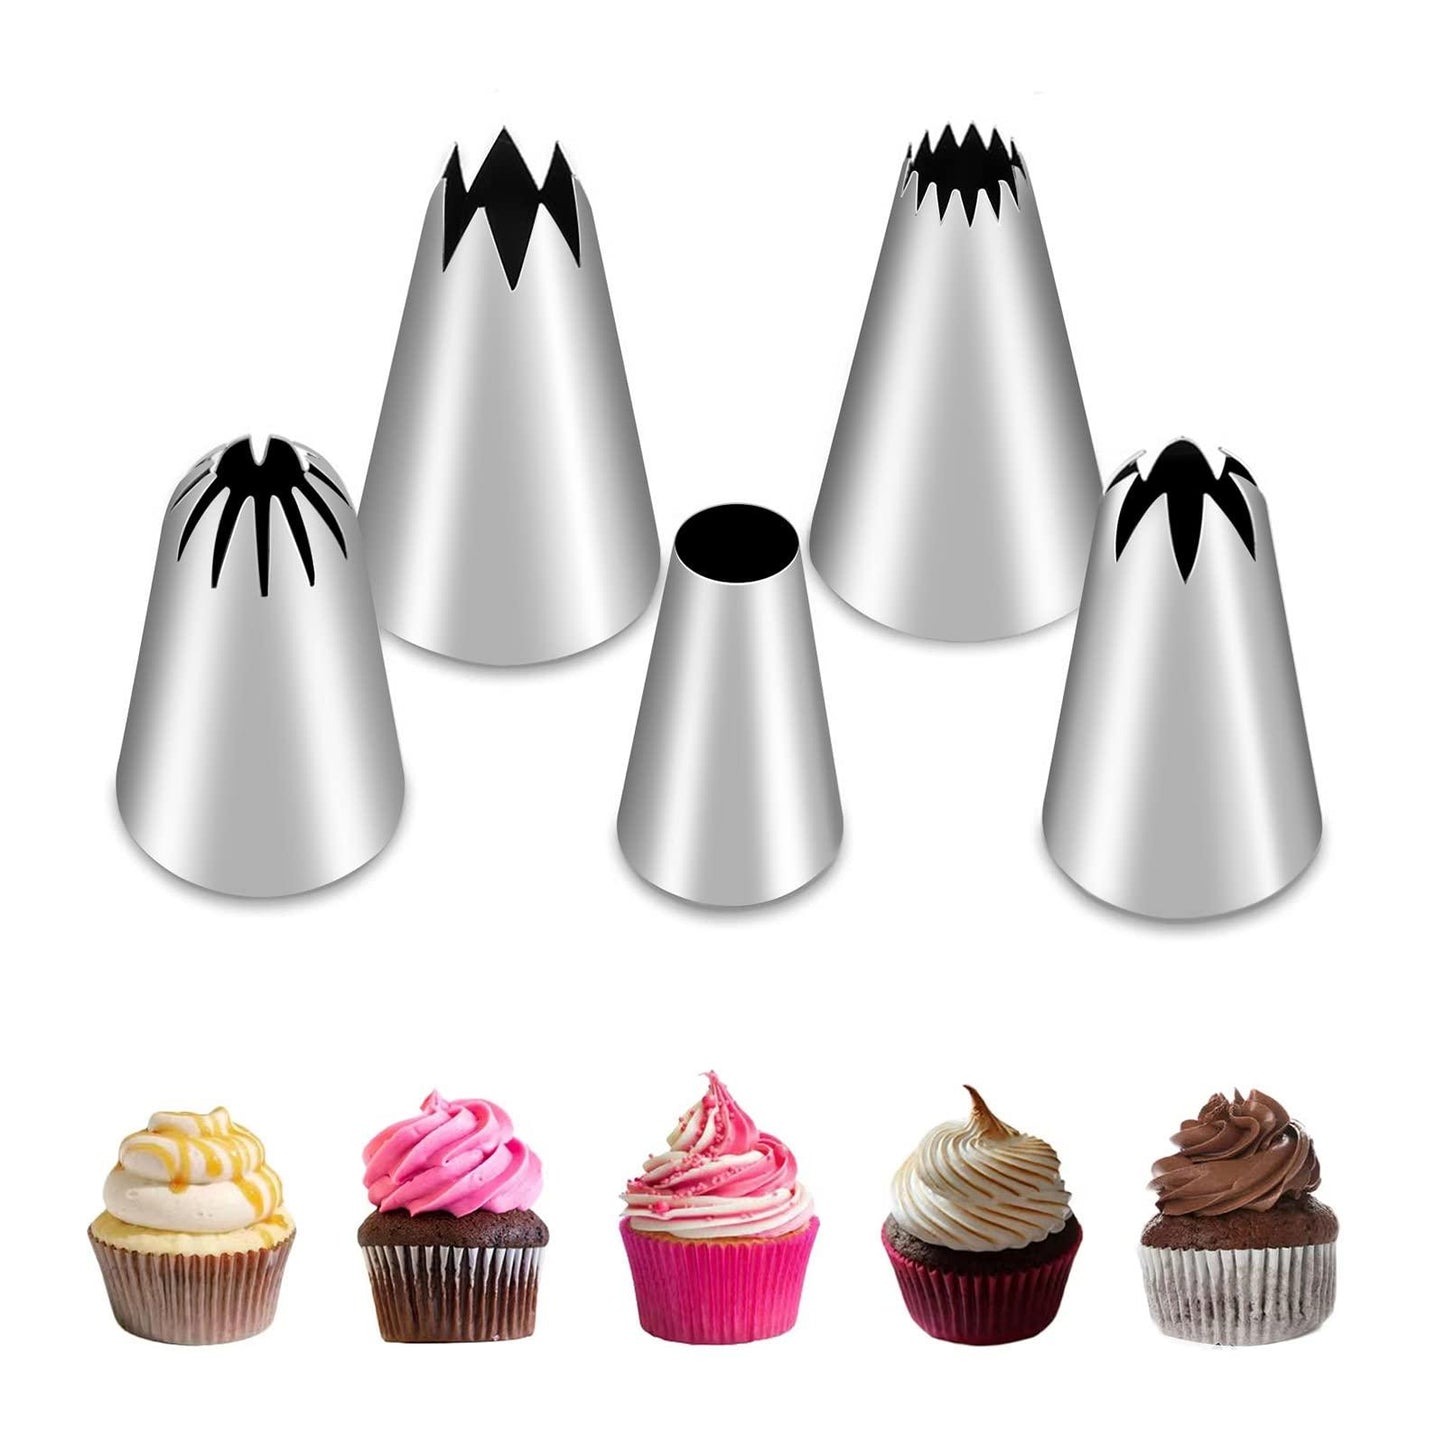 5Pcs Large Piping Tips Set, Stainless Steel Frosting Tips, Cake Decorating Tips for Cupcakes Cakes Cookies Decorating - CookCave